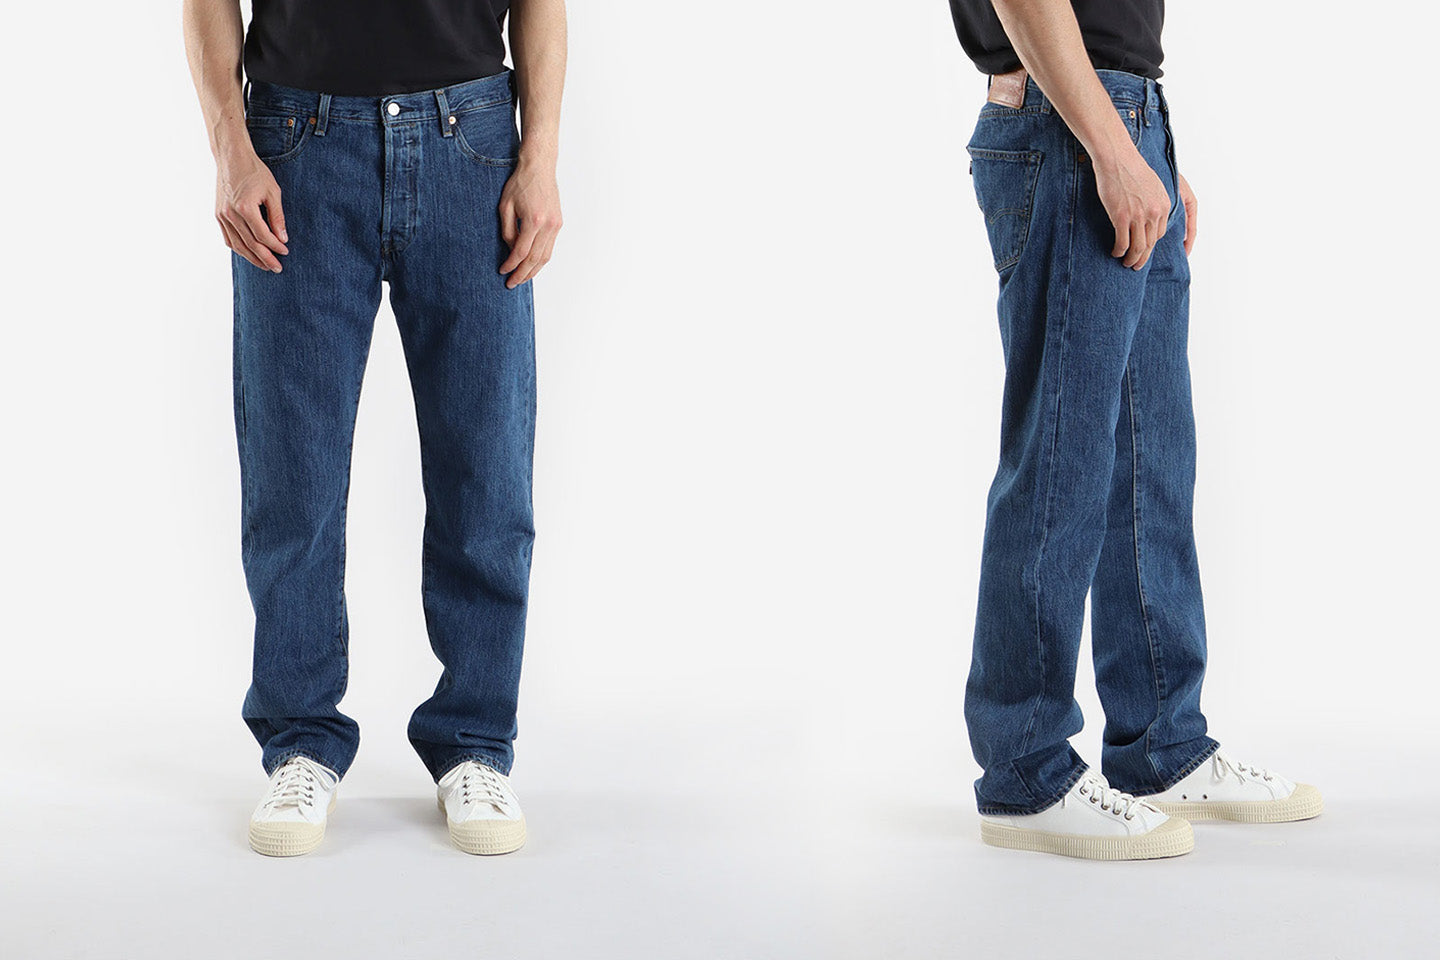 Levi's Fit Guide  How do Levi's Jeans Fit? – Urban Industry